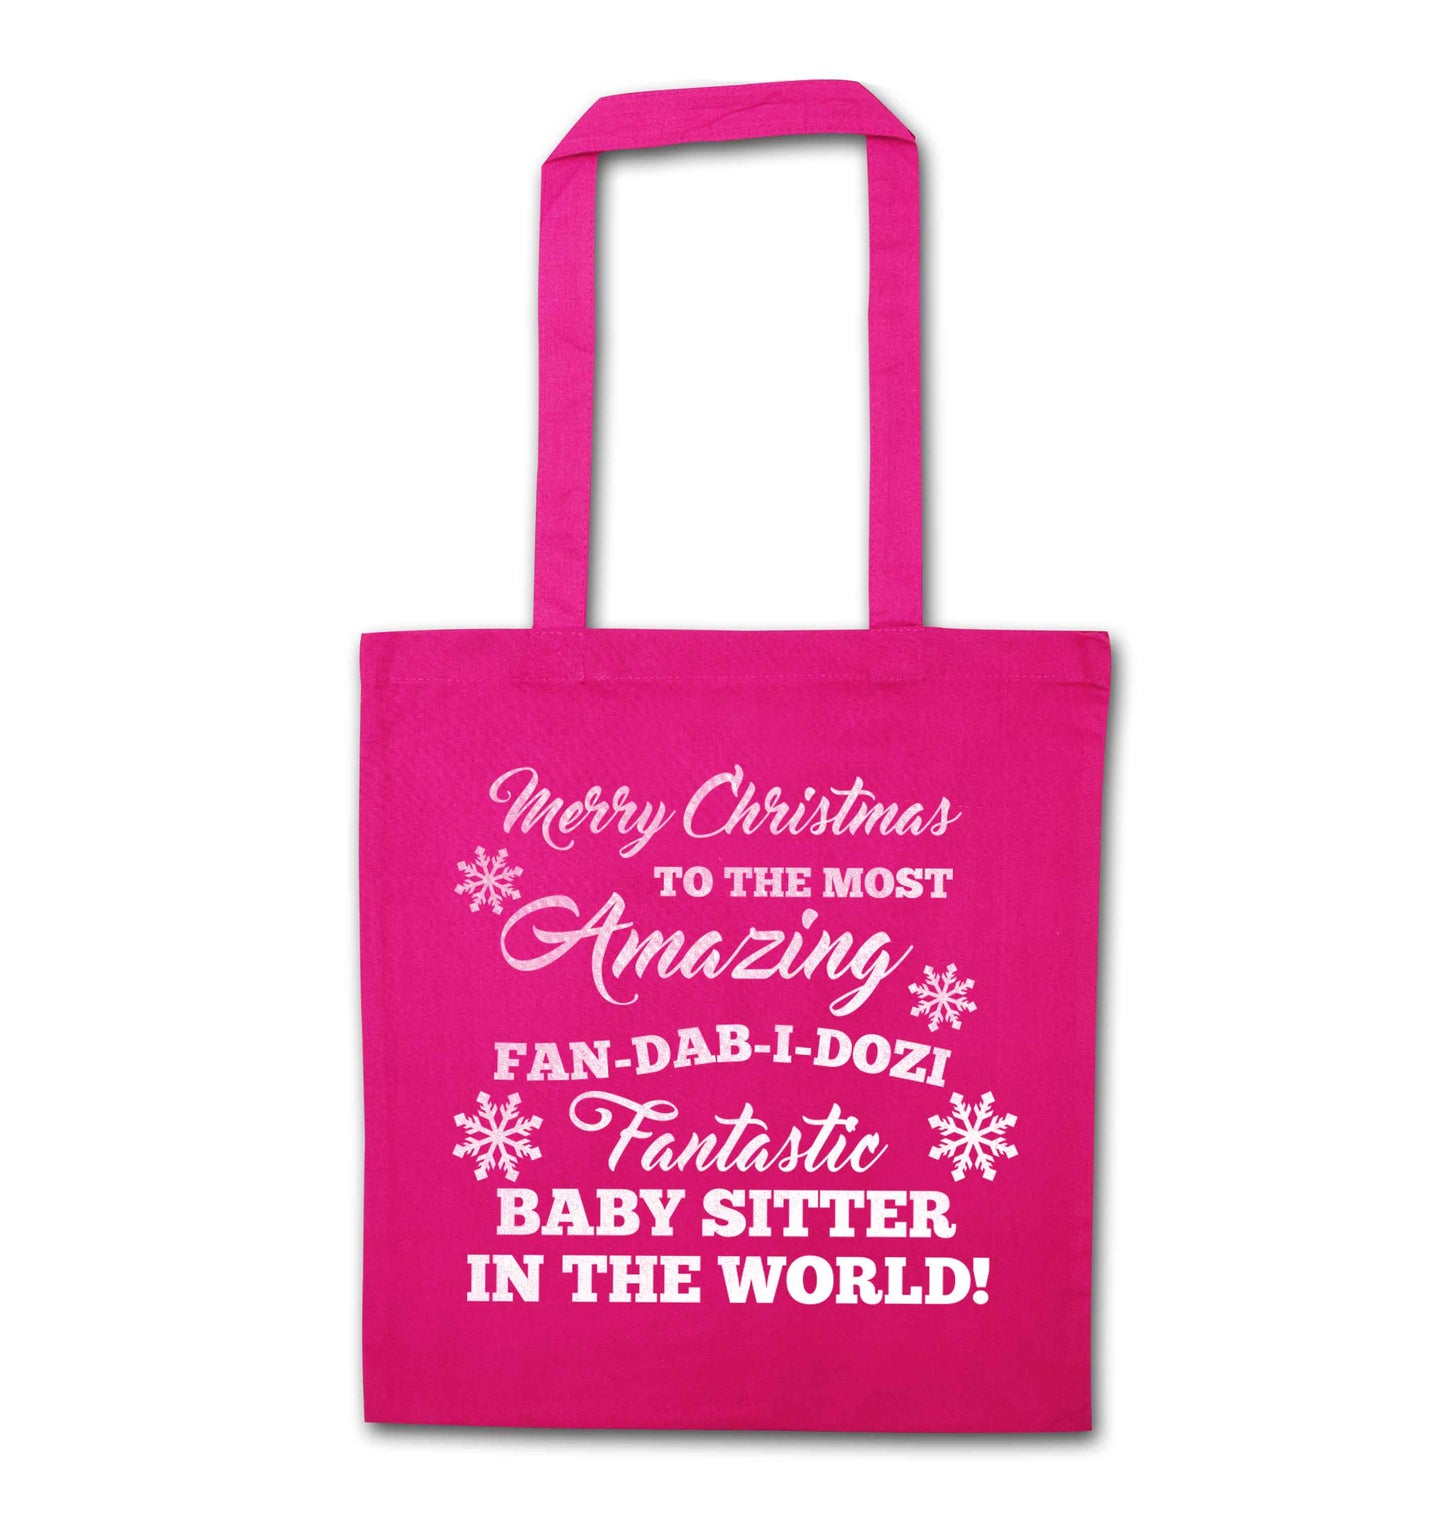 Merry Christmas to the most amazing fan-dab-i-dozi fantasic baby sitter in the world pink tote bag